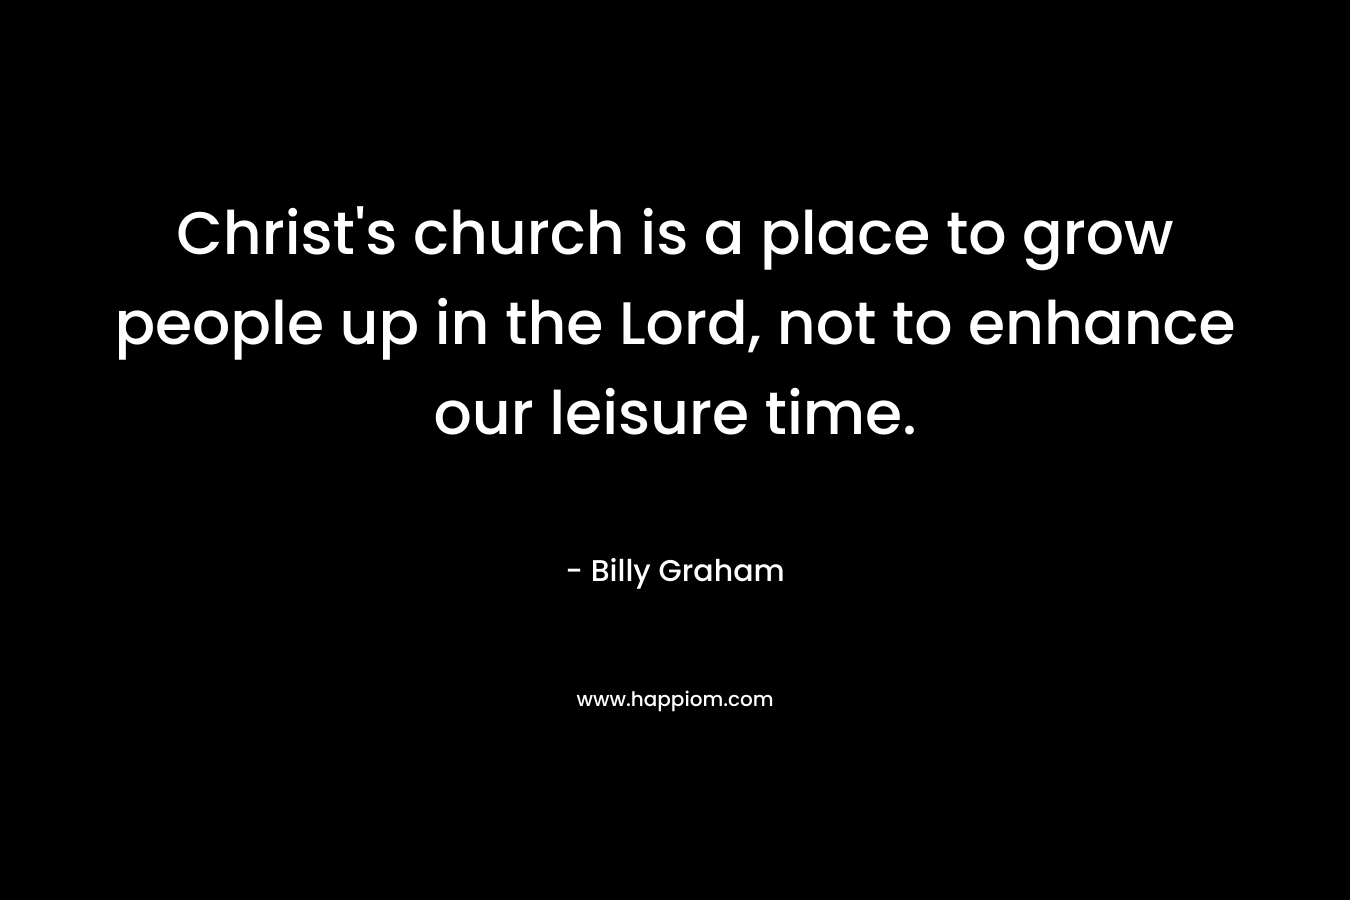 Christ's church is a place to grow people up in the Lord, not to enhance our leisure time.